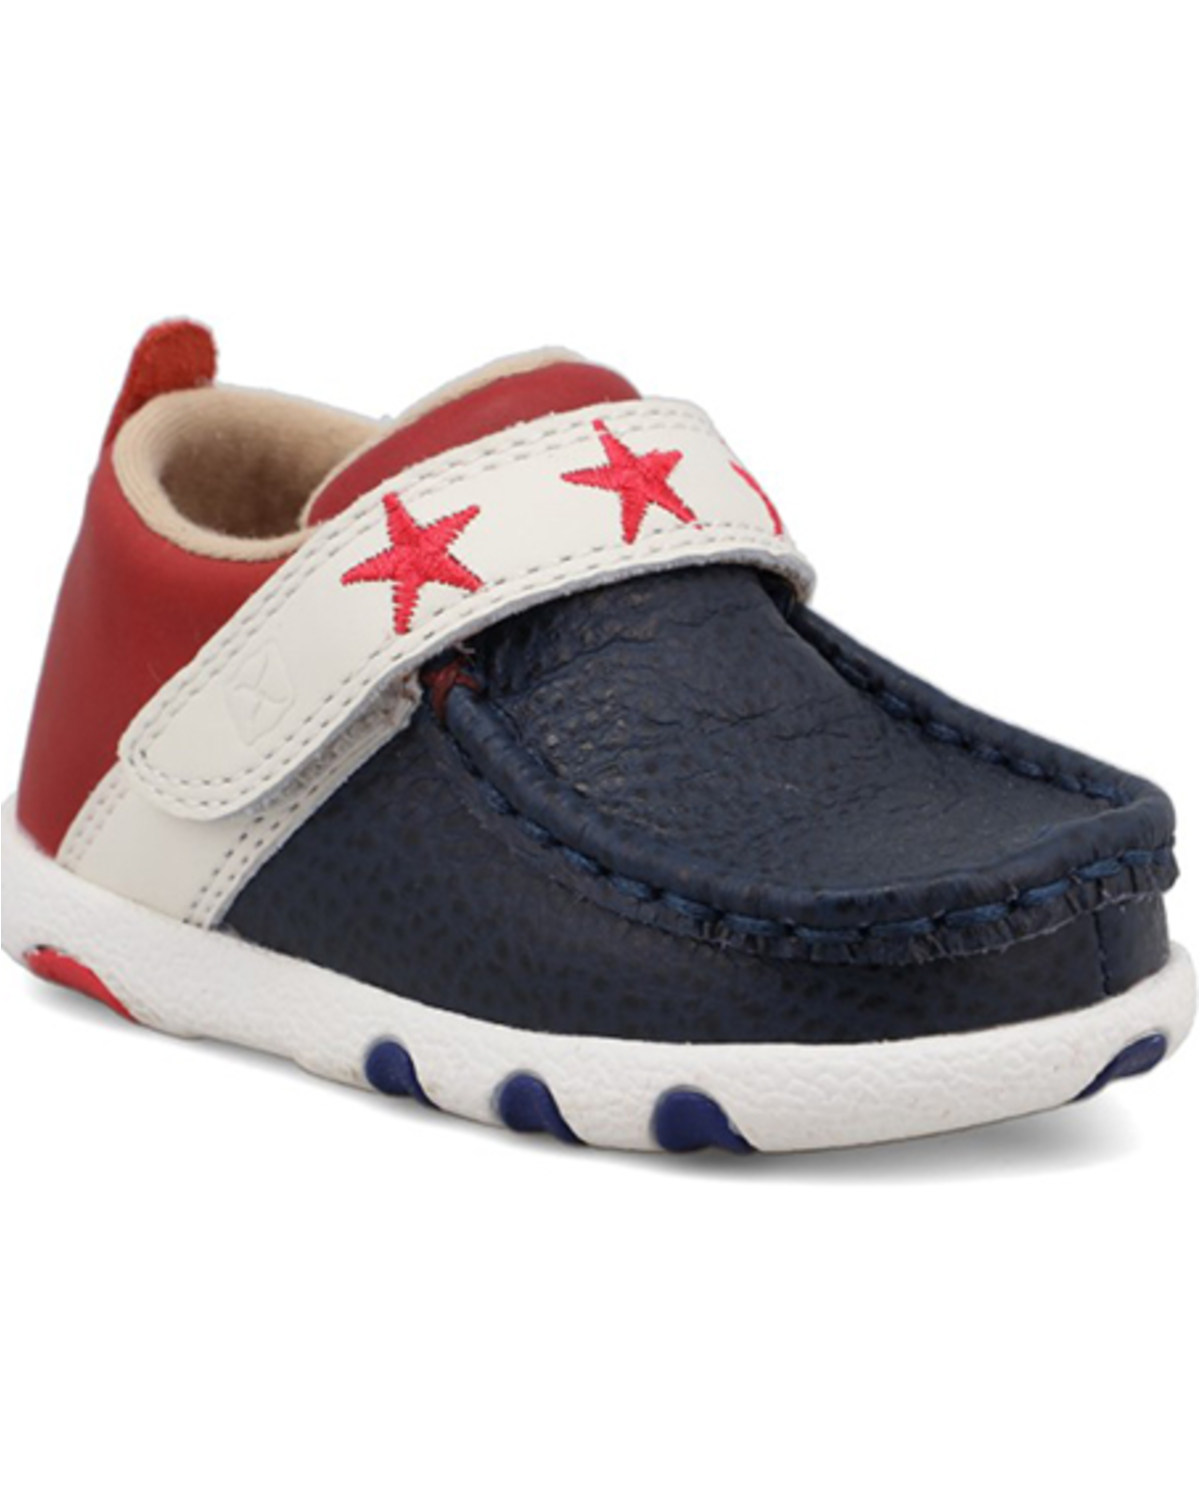 Twisted X Toddler Boys' Patriotic Driving Shoe - Moc Toe